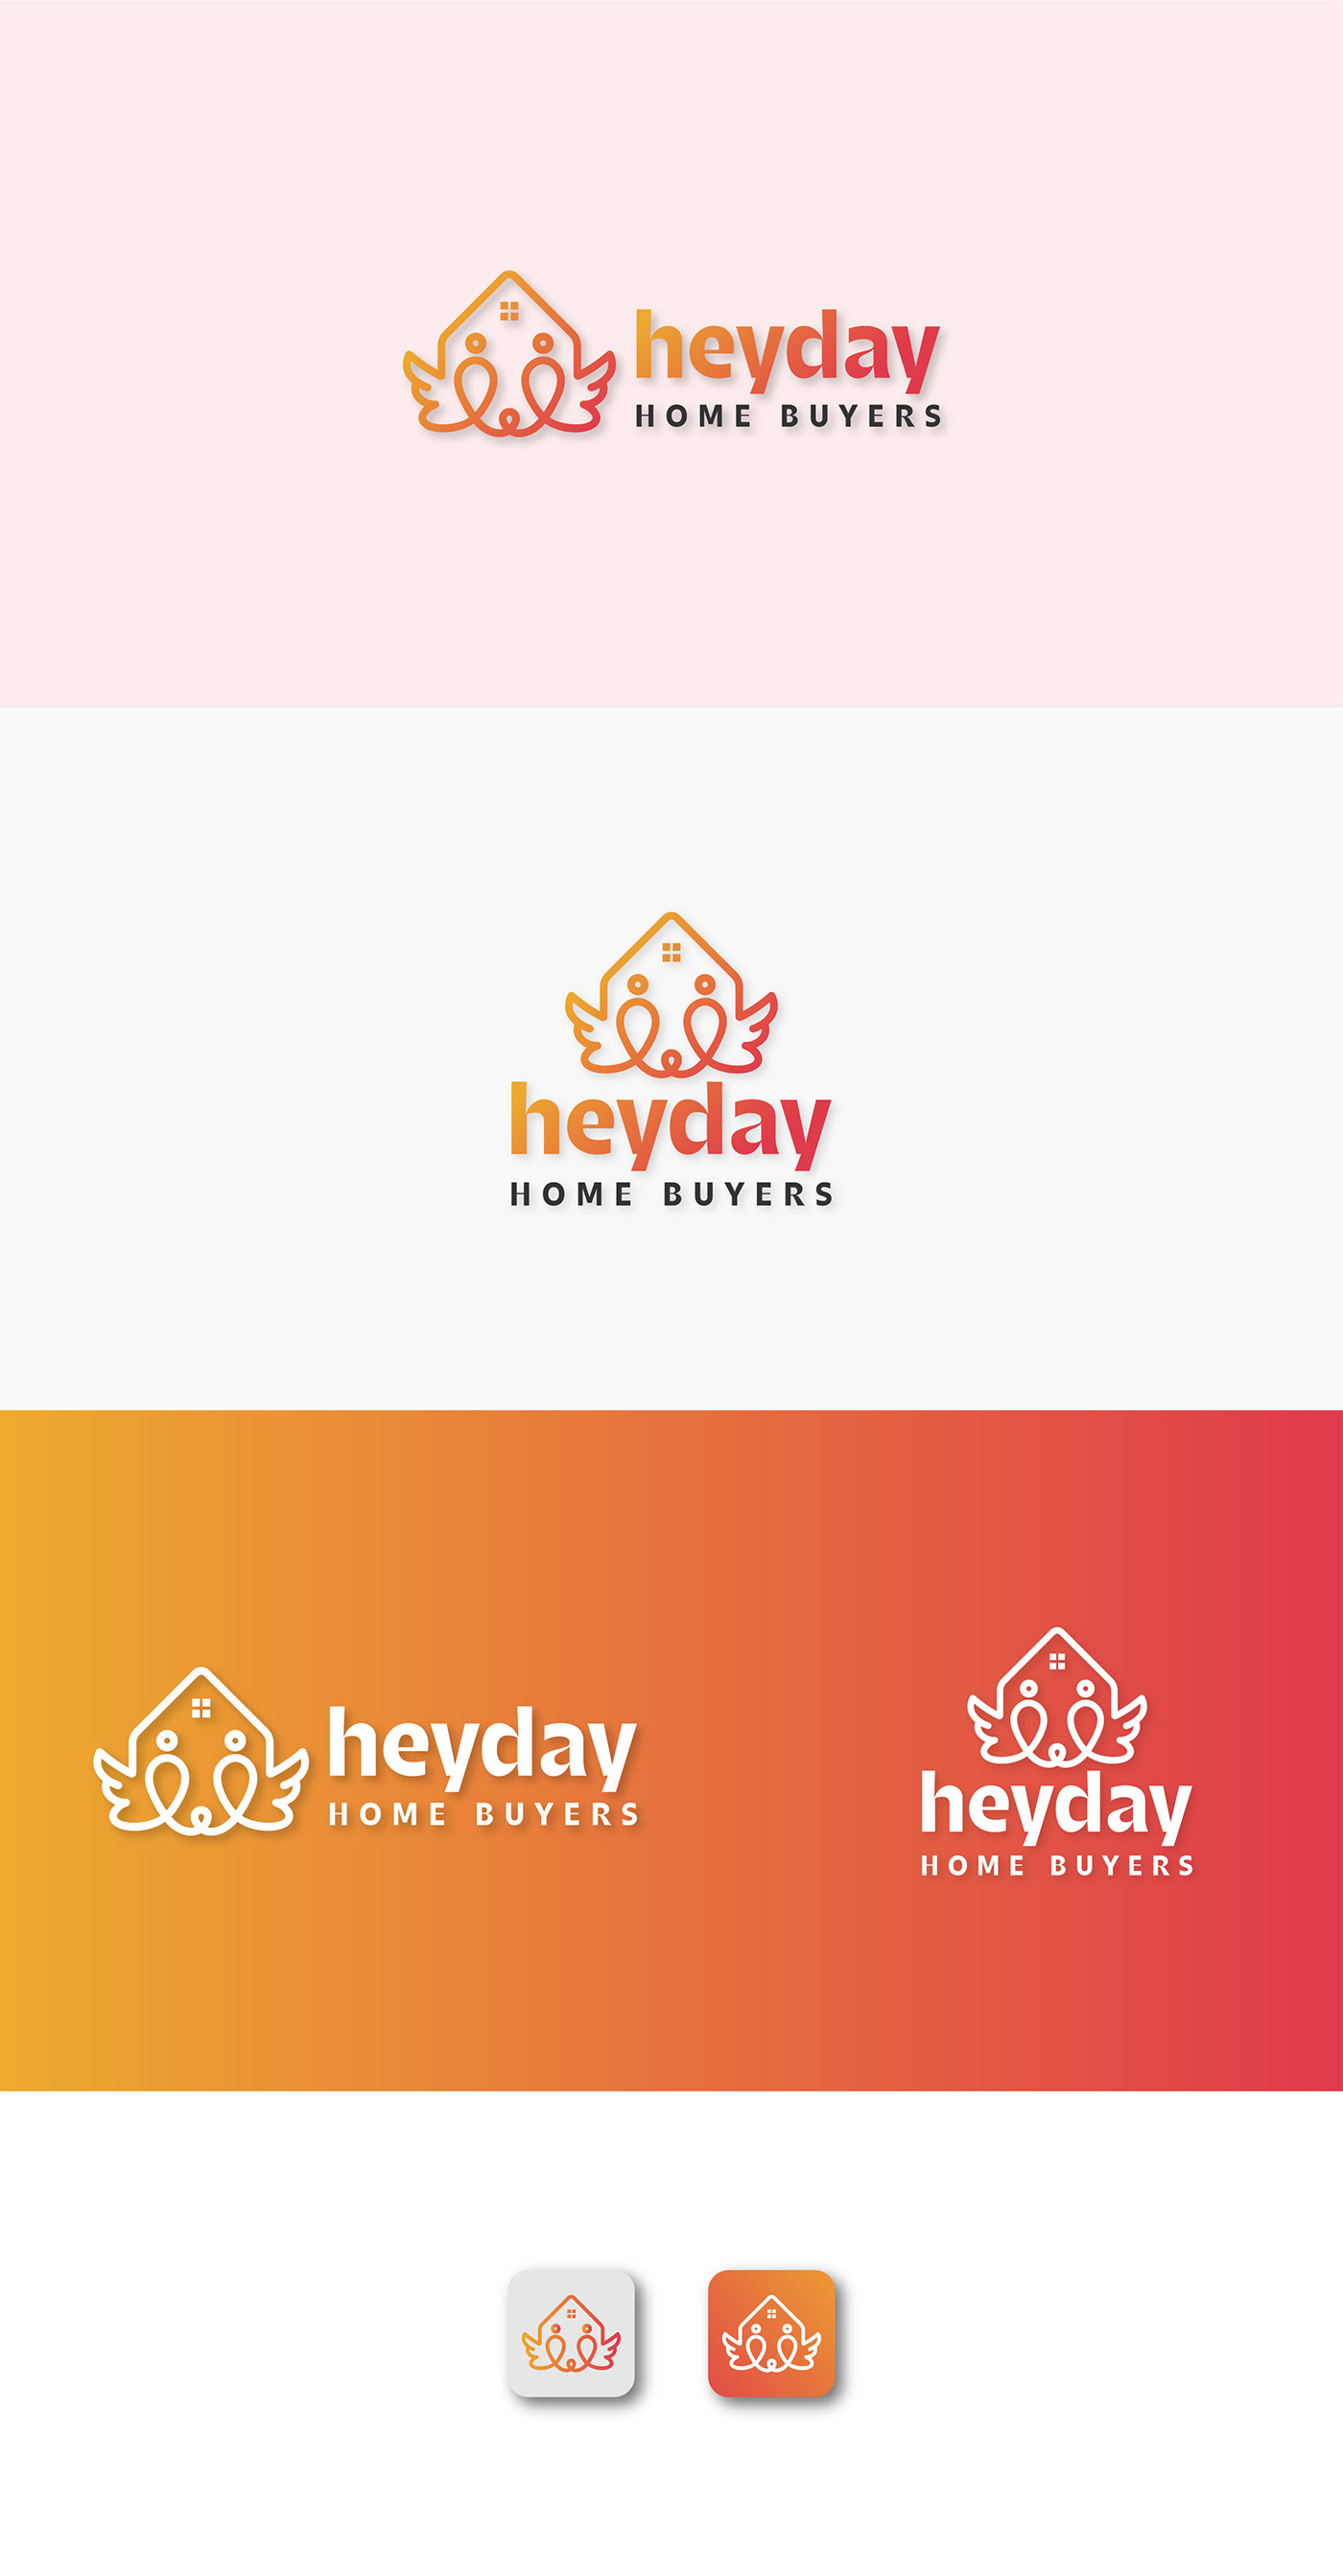 logo Logo Design house selling home buyers home selling Property selling